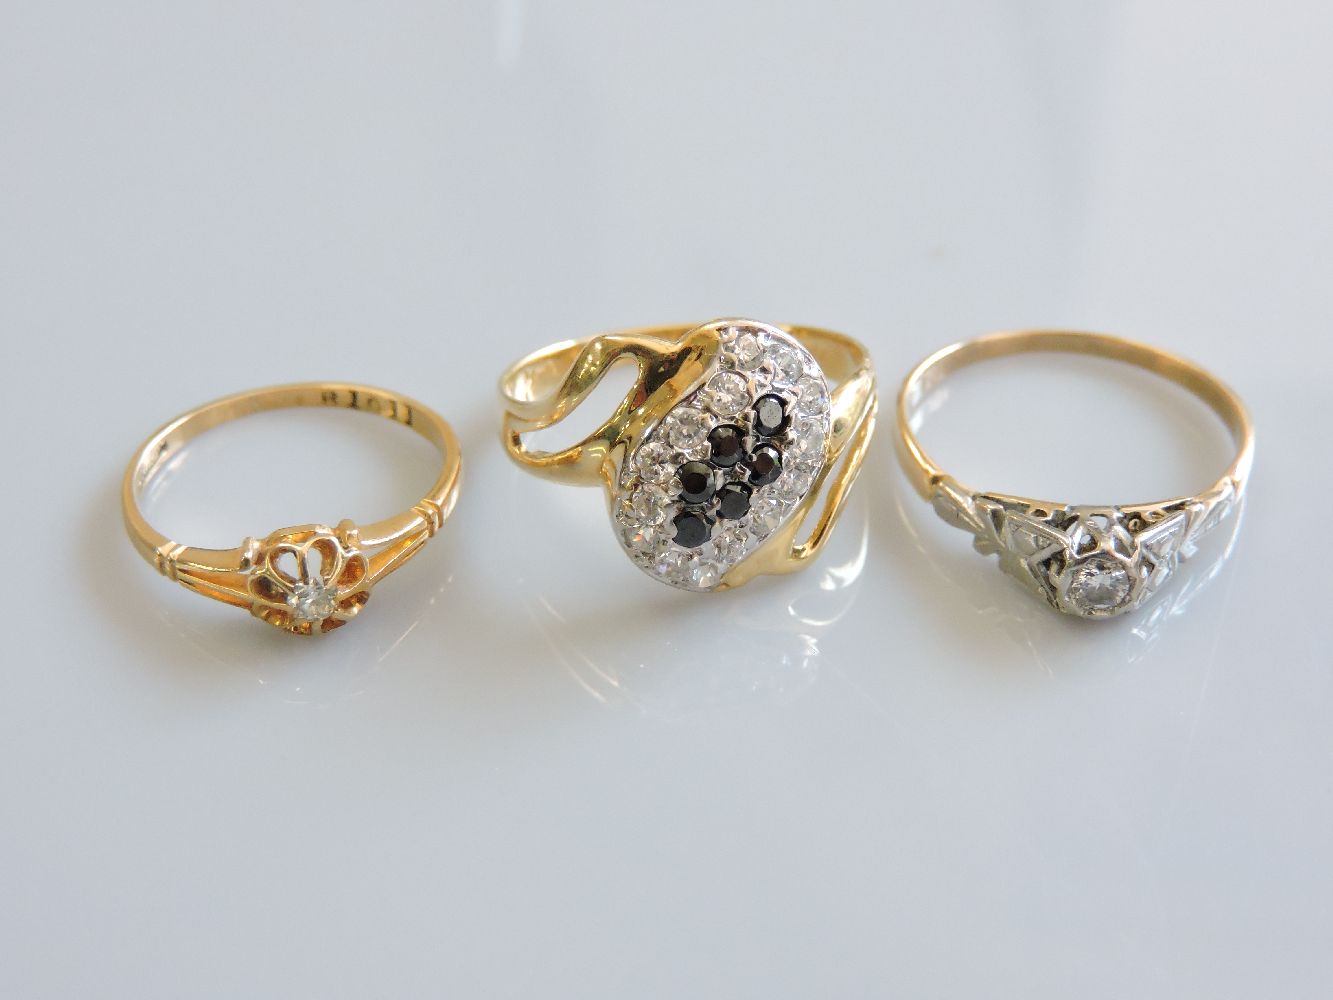 Two diamond rings, marked 18ct, and a cubic zirconia ring marked 750